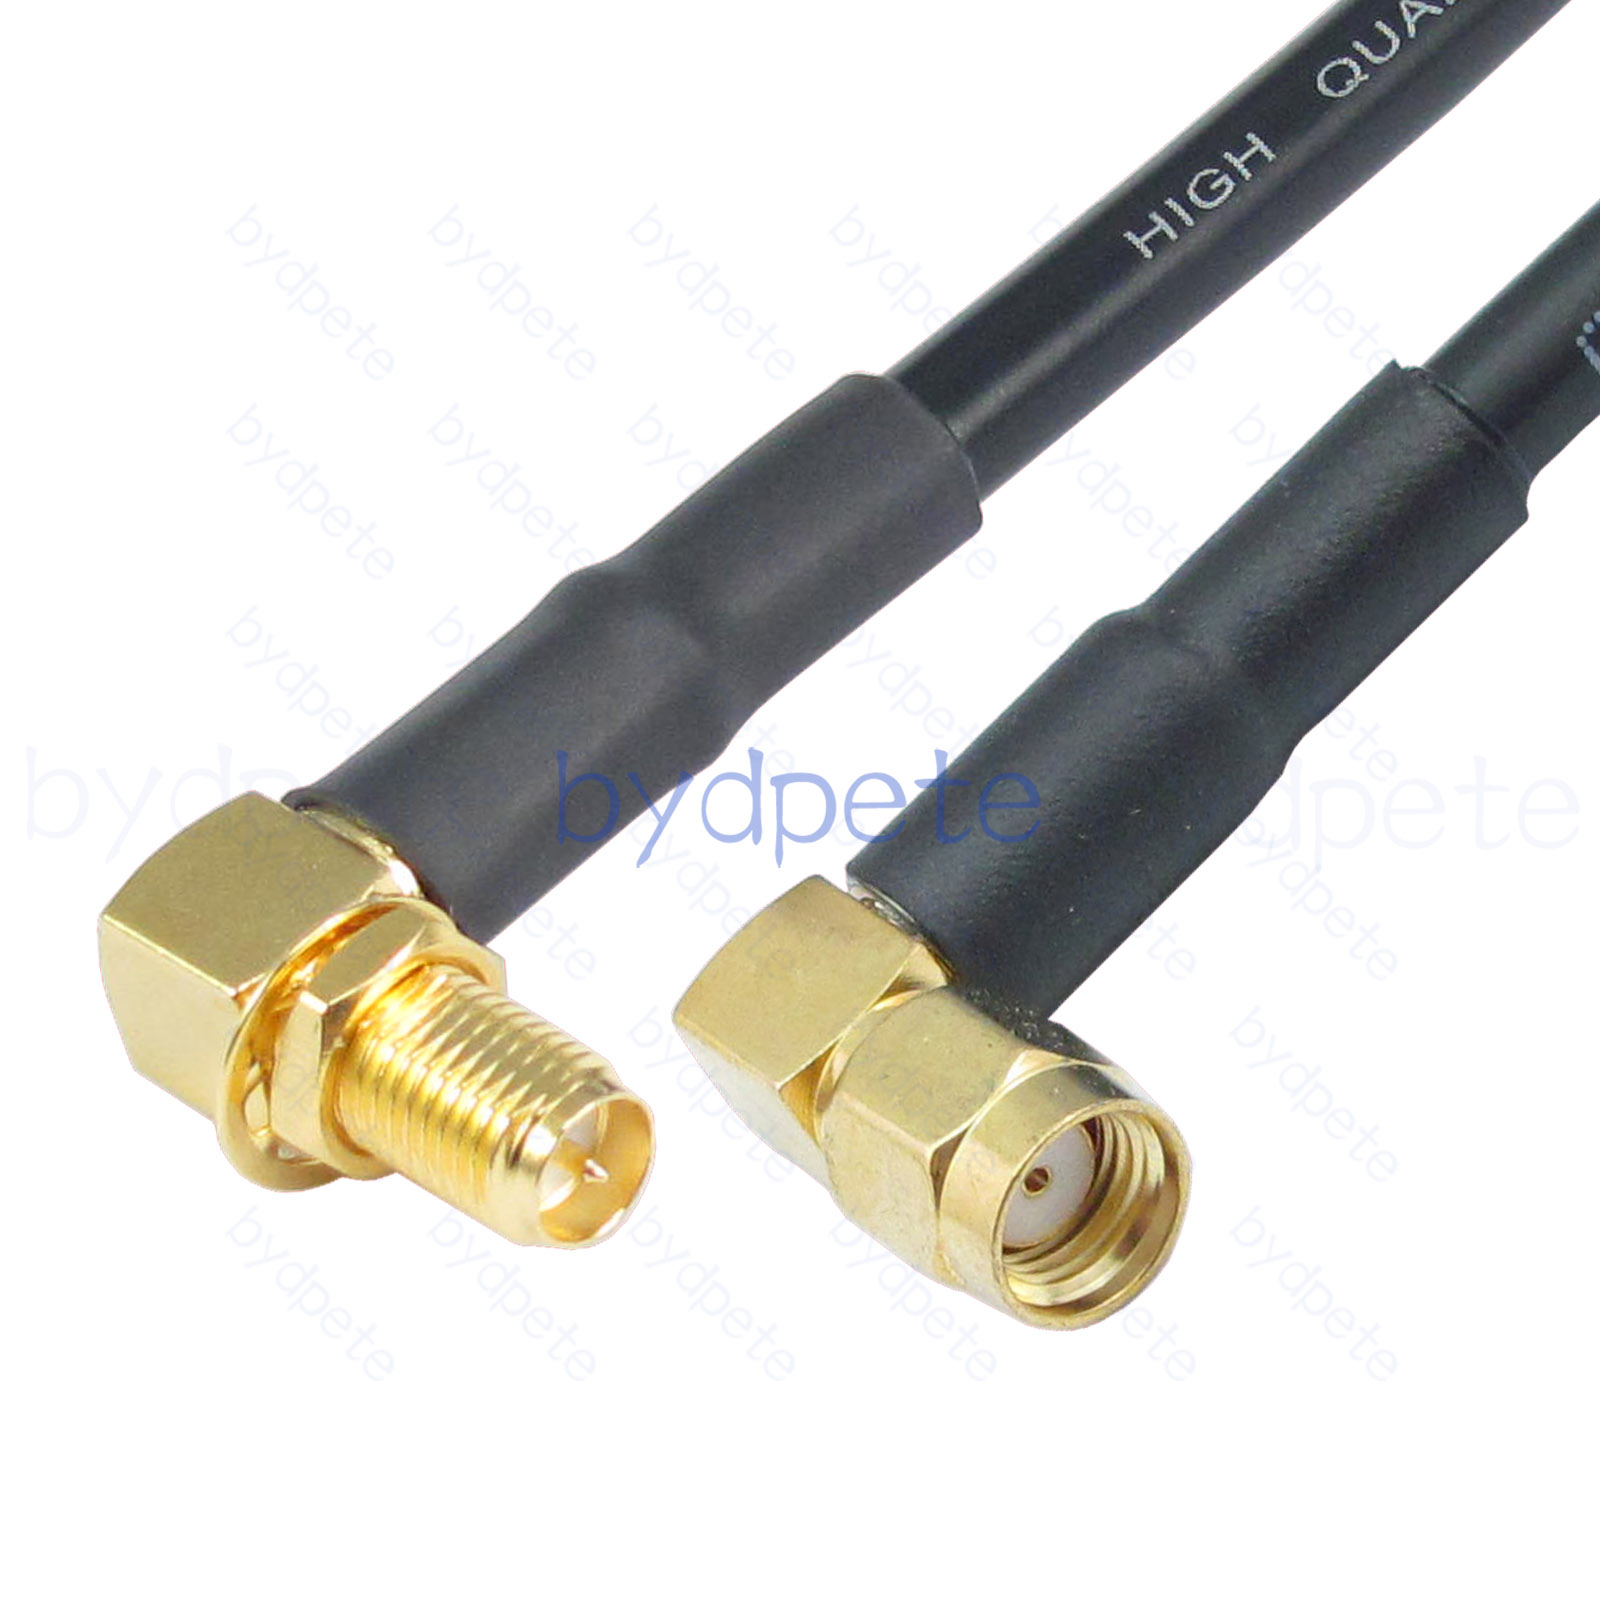 RP-SMA Male right angle 90 degree to RP-SMA Female right angle 90 degree RG58 Coaxial Cable Koaxial Kable 50Ohm extension lot bydpete BYDC020SMA58RR